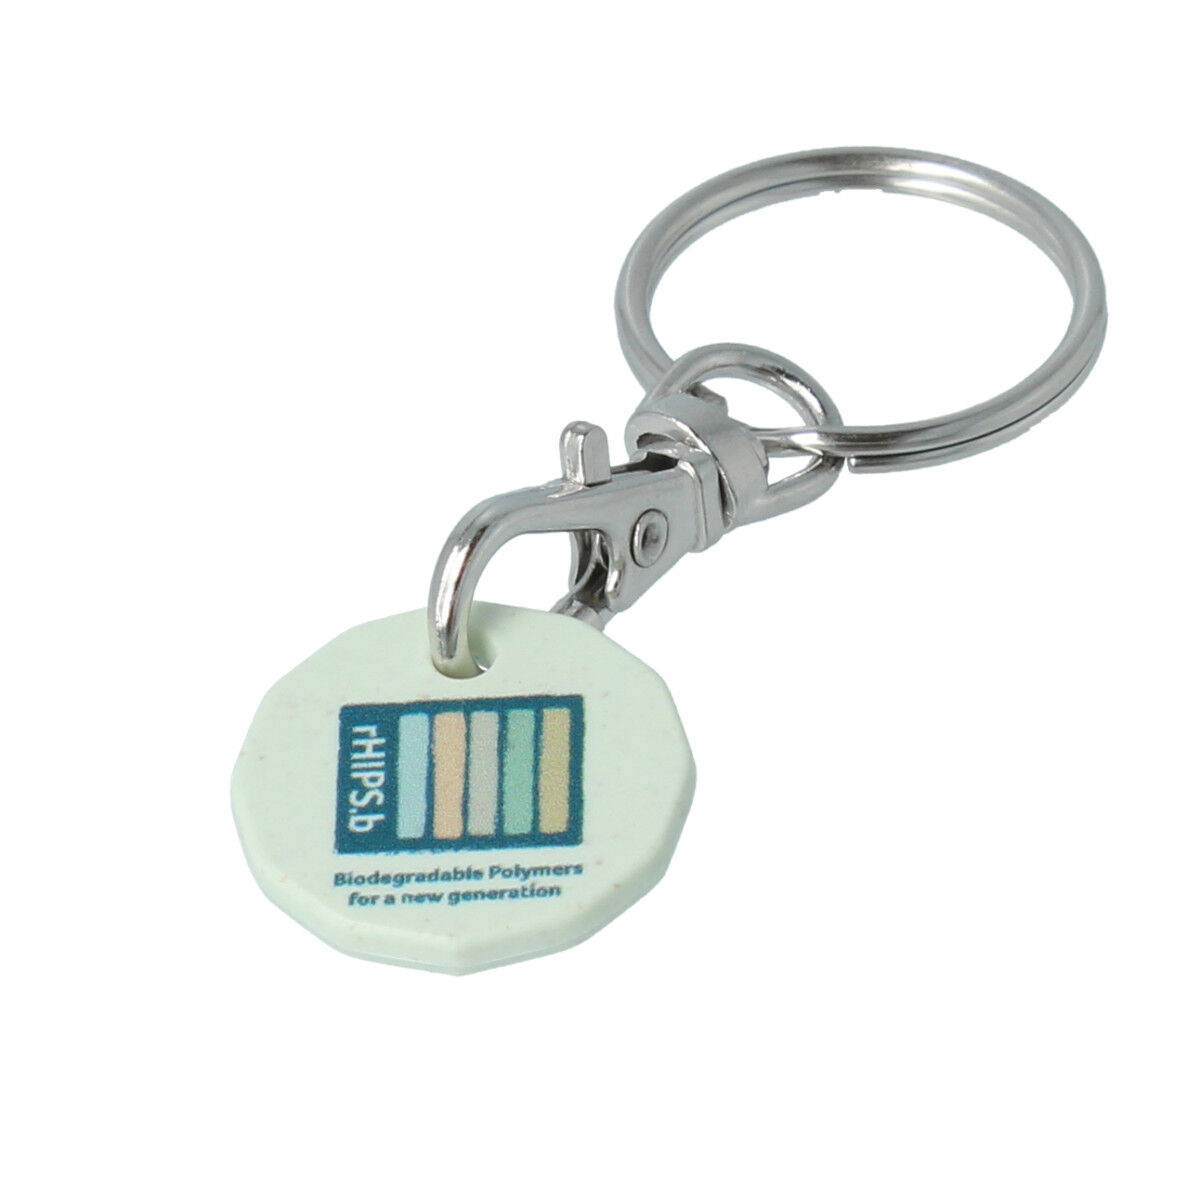 Recycled Plastic rHIPS Trolley Coin Keyring